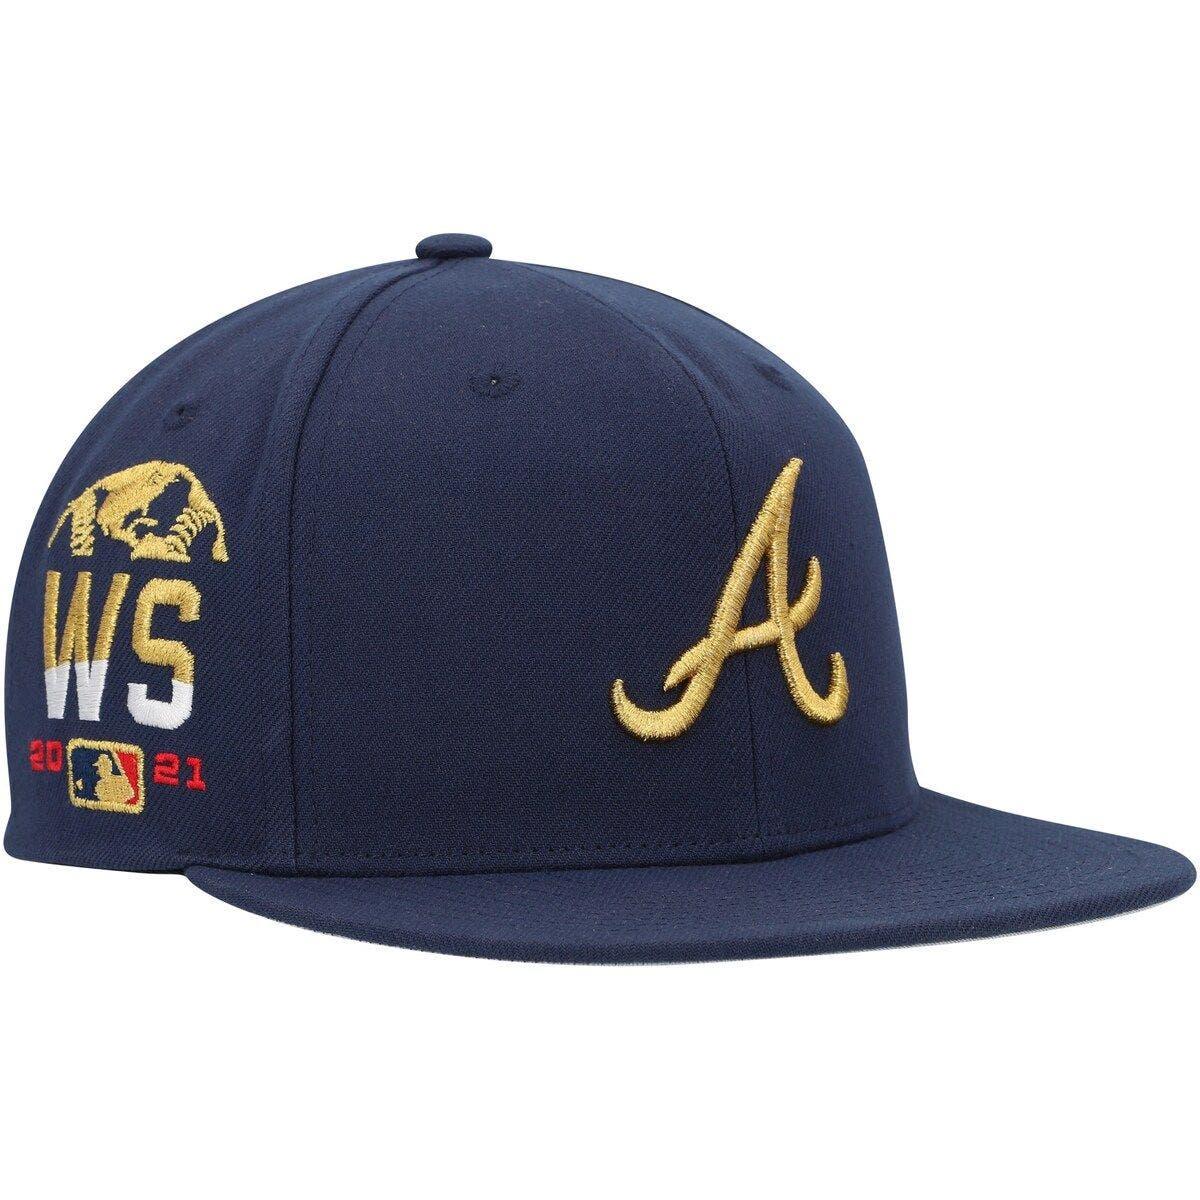 Women's Mitchell & Ness Royal Atlanta Braves Cooperstown